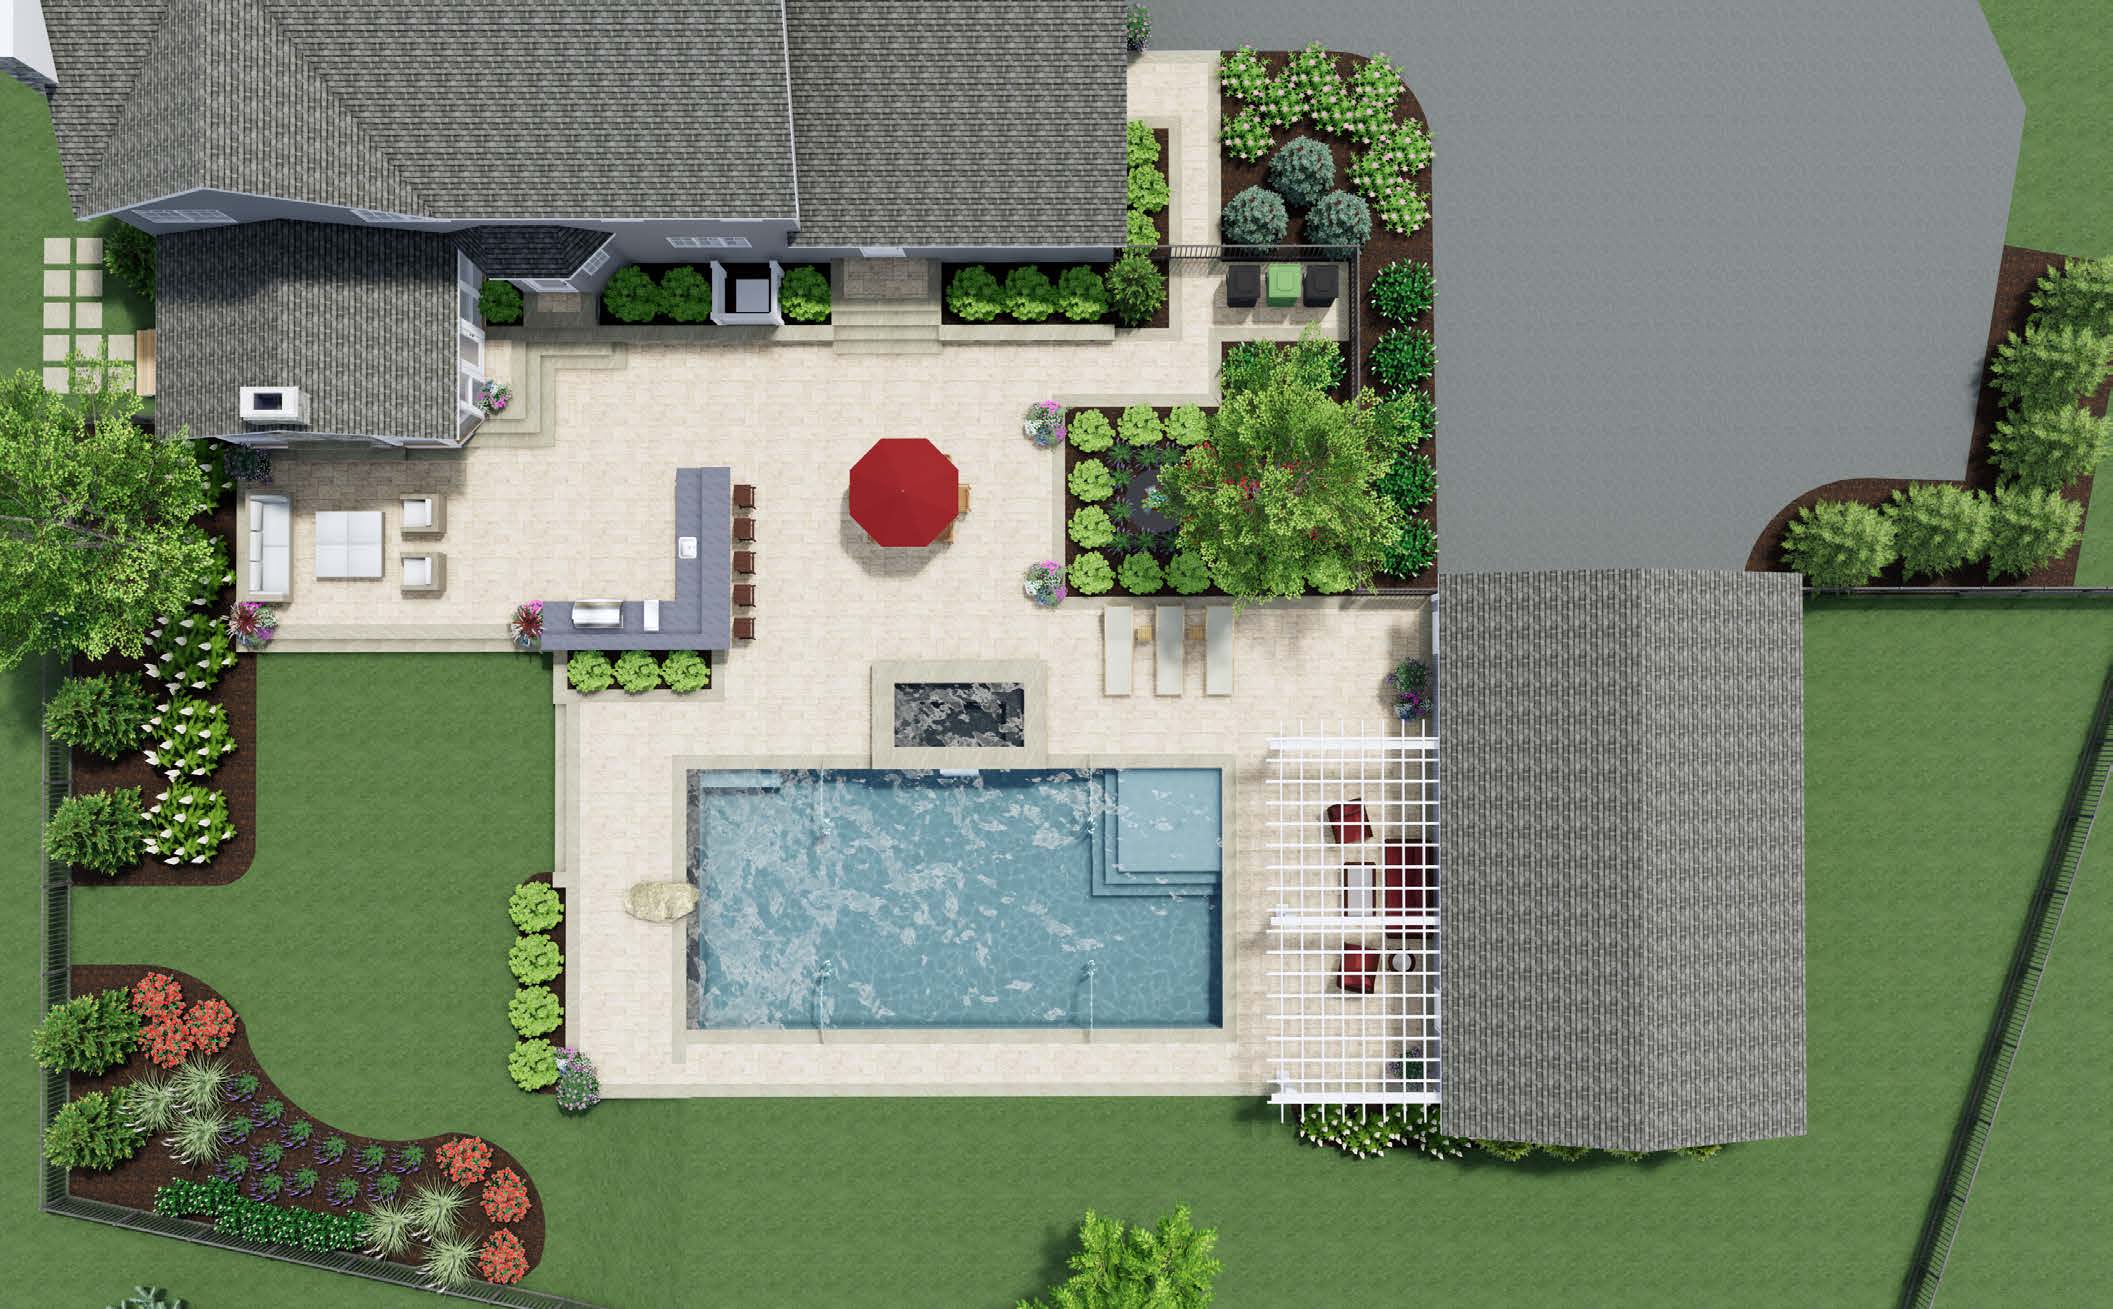 3d landscape design with patio, pool, and plants